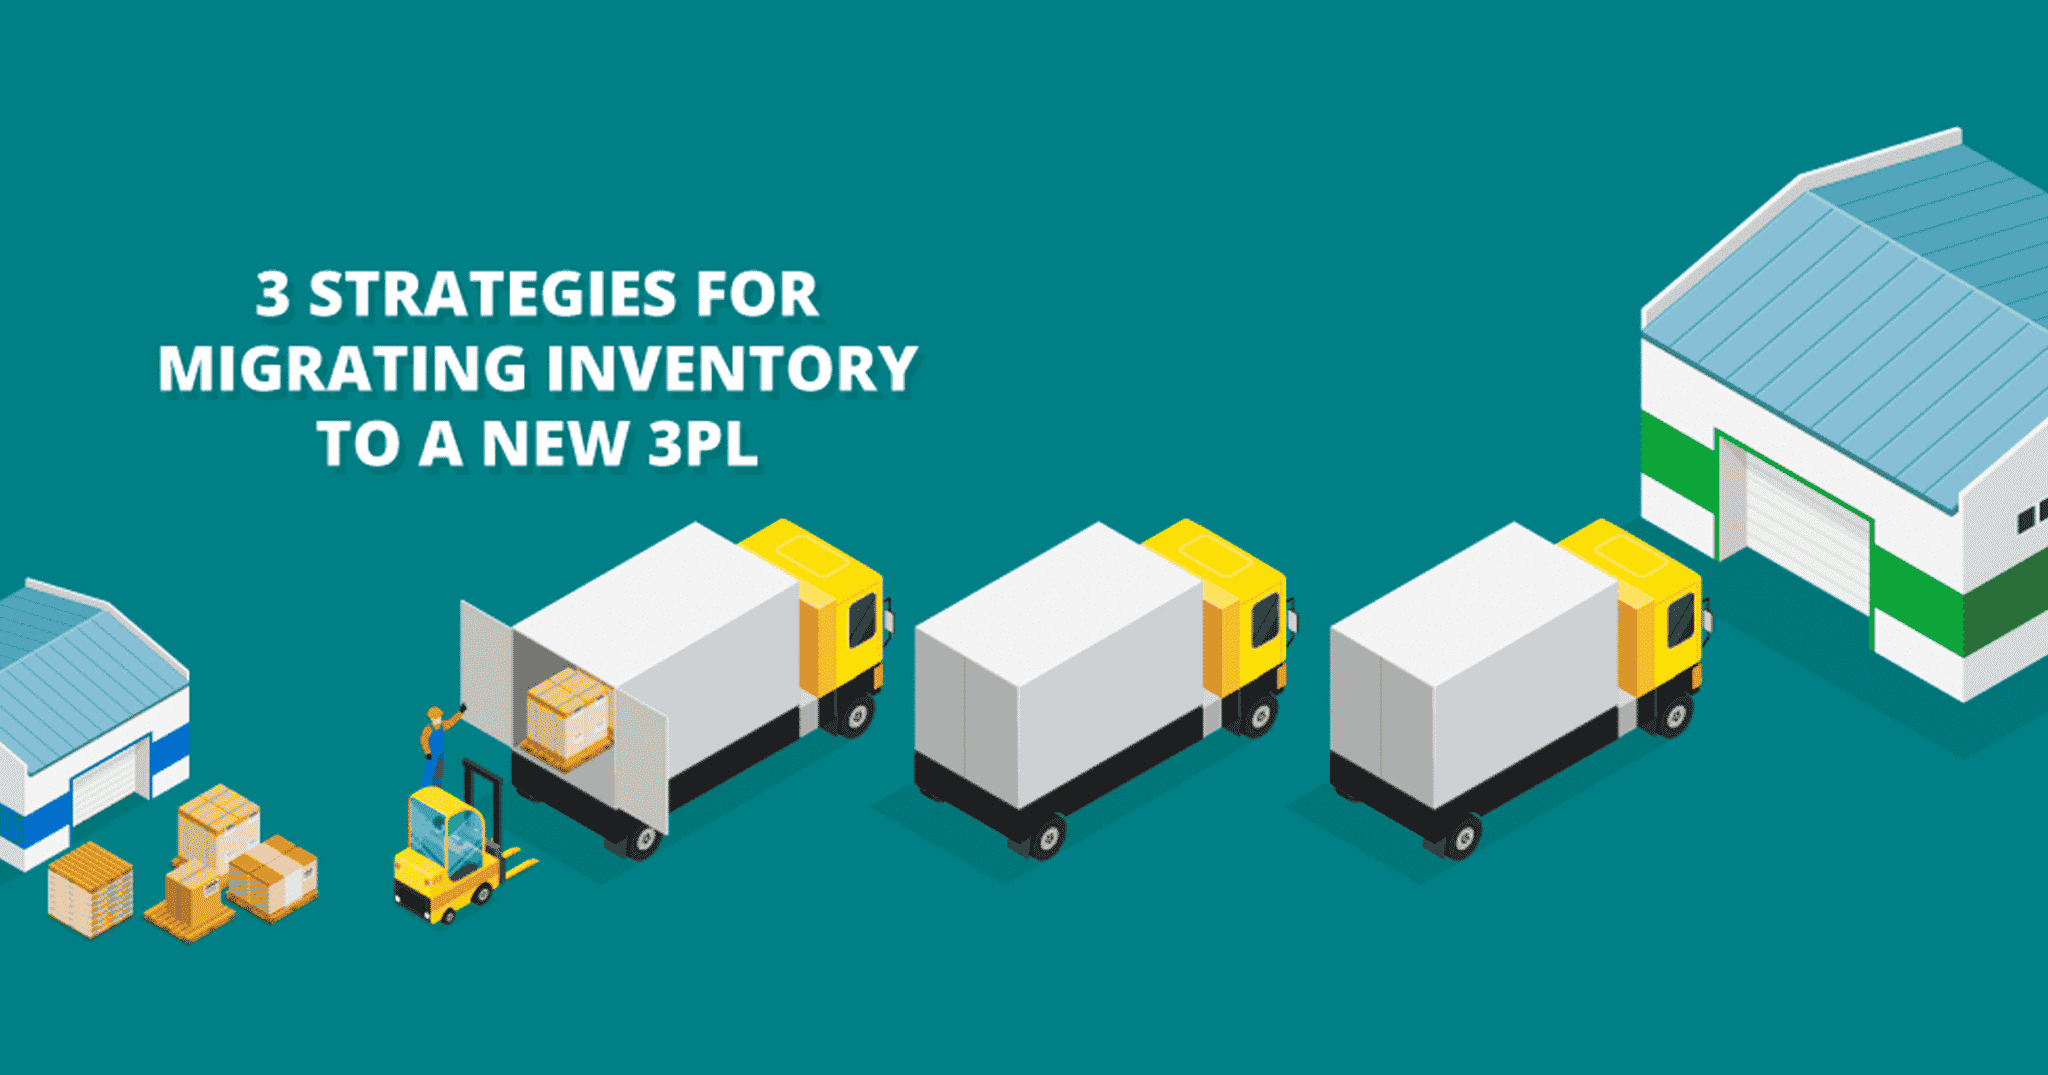 Three Strategies for Migrating Inventory to a New 3PL